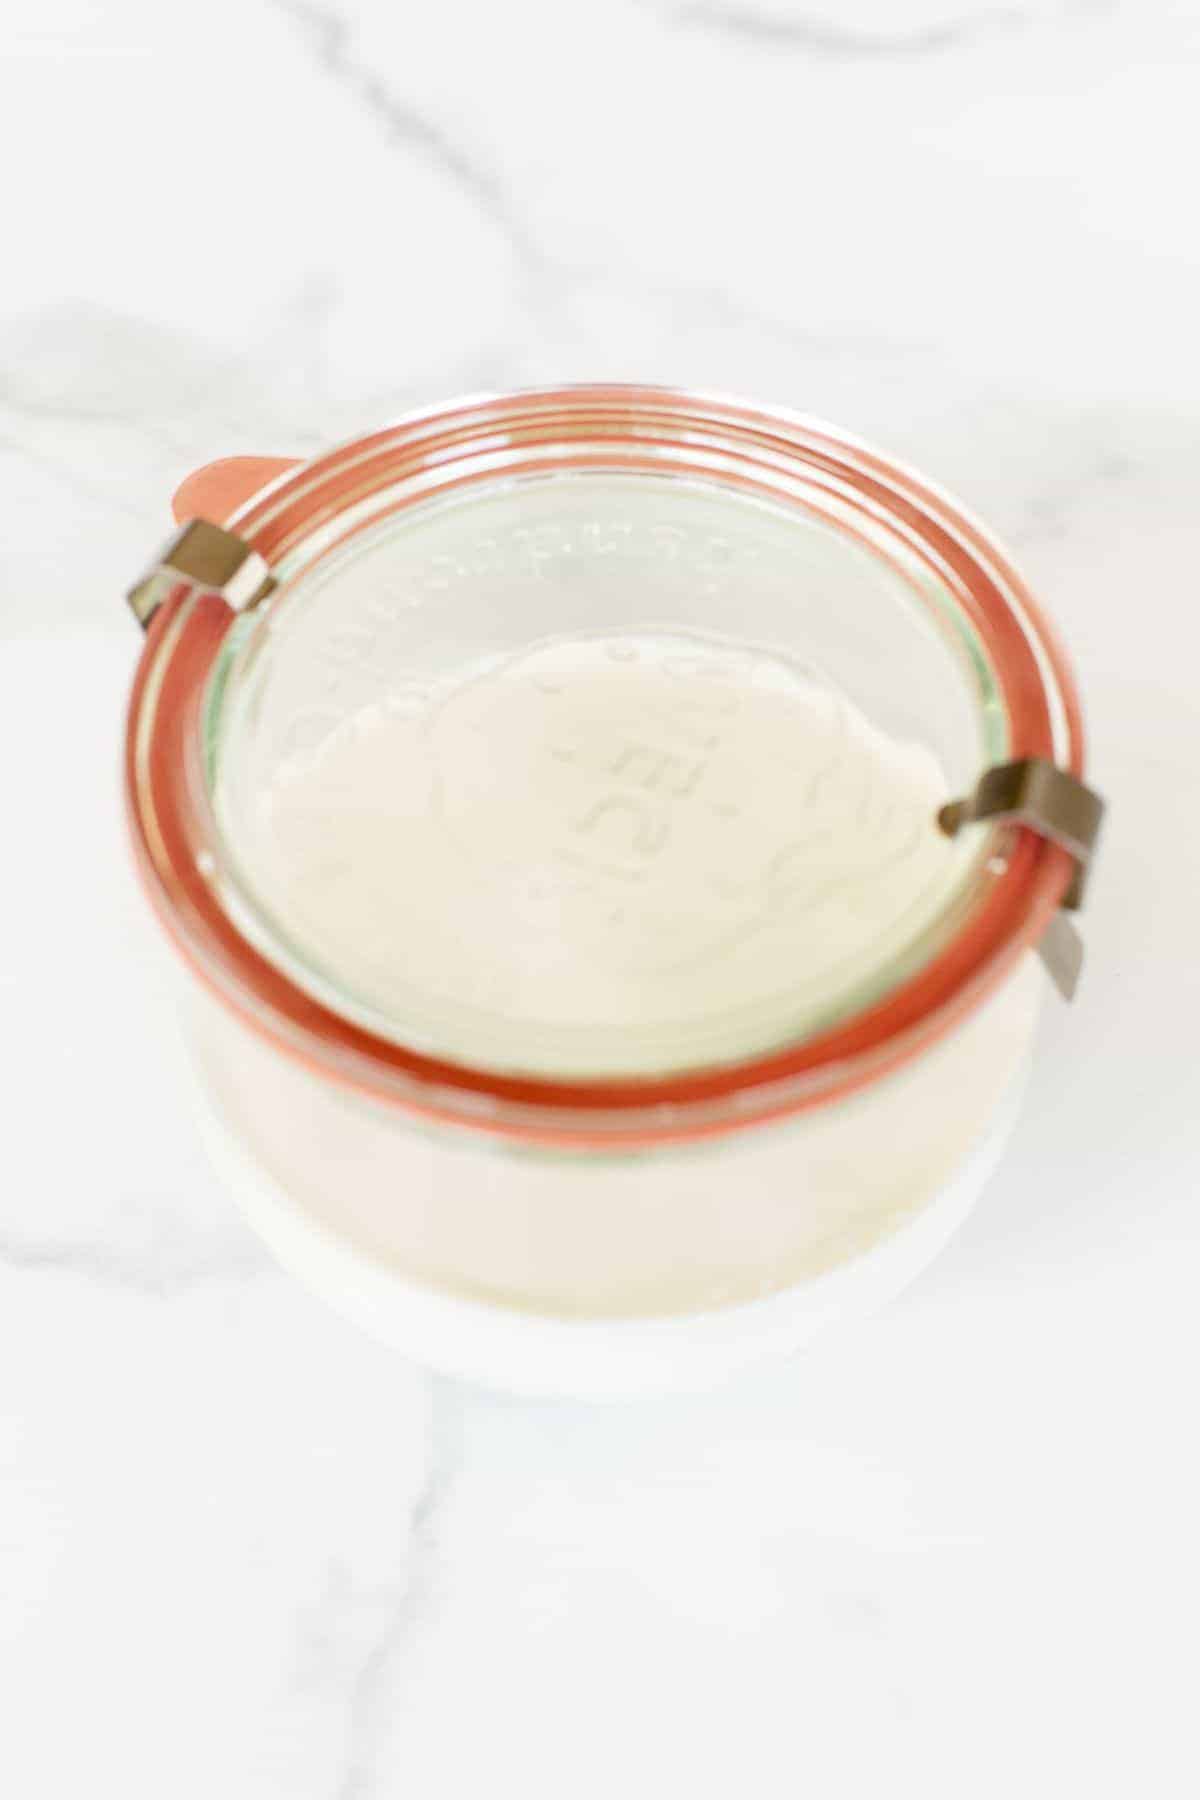 creme fraiche substitute in a clear glass weck jar with lid.